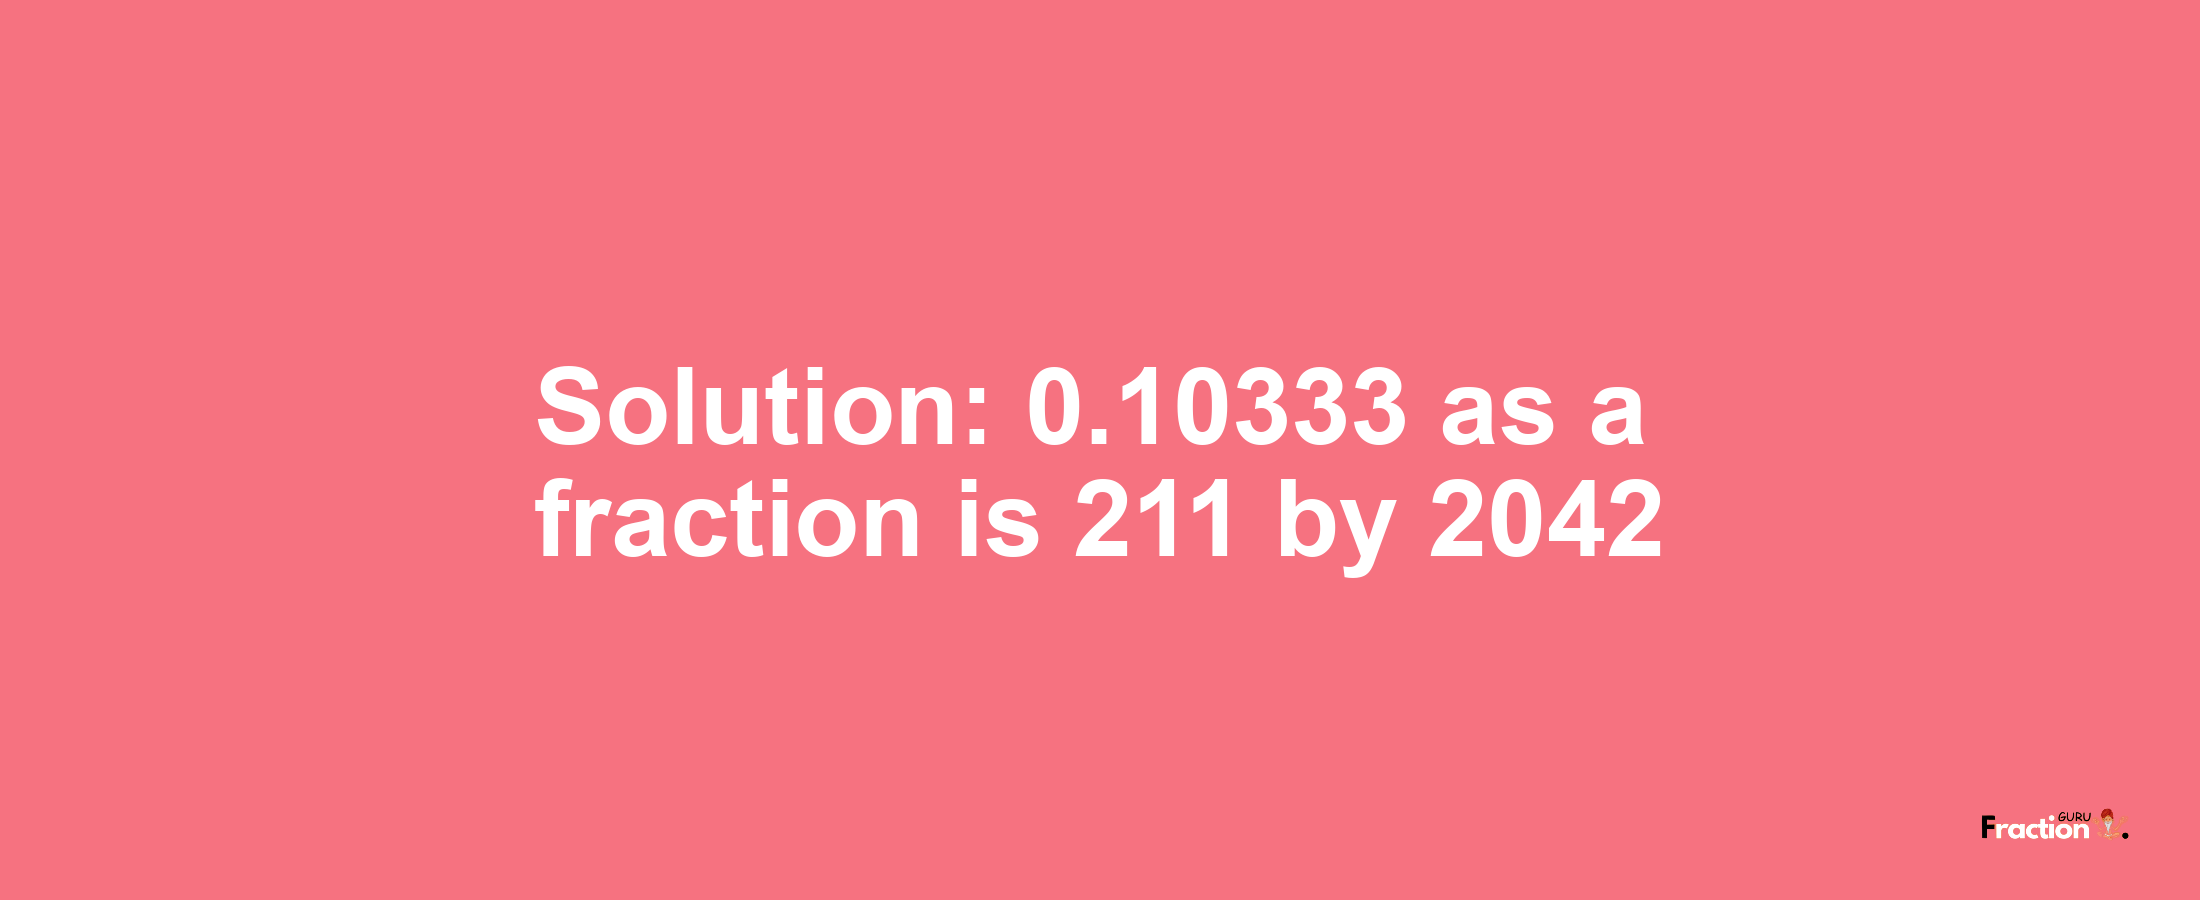 Solution:0.10333 as a fraction is 211/2042